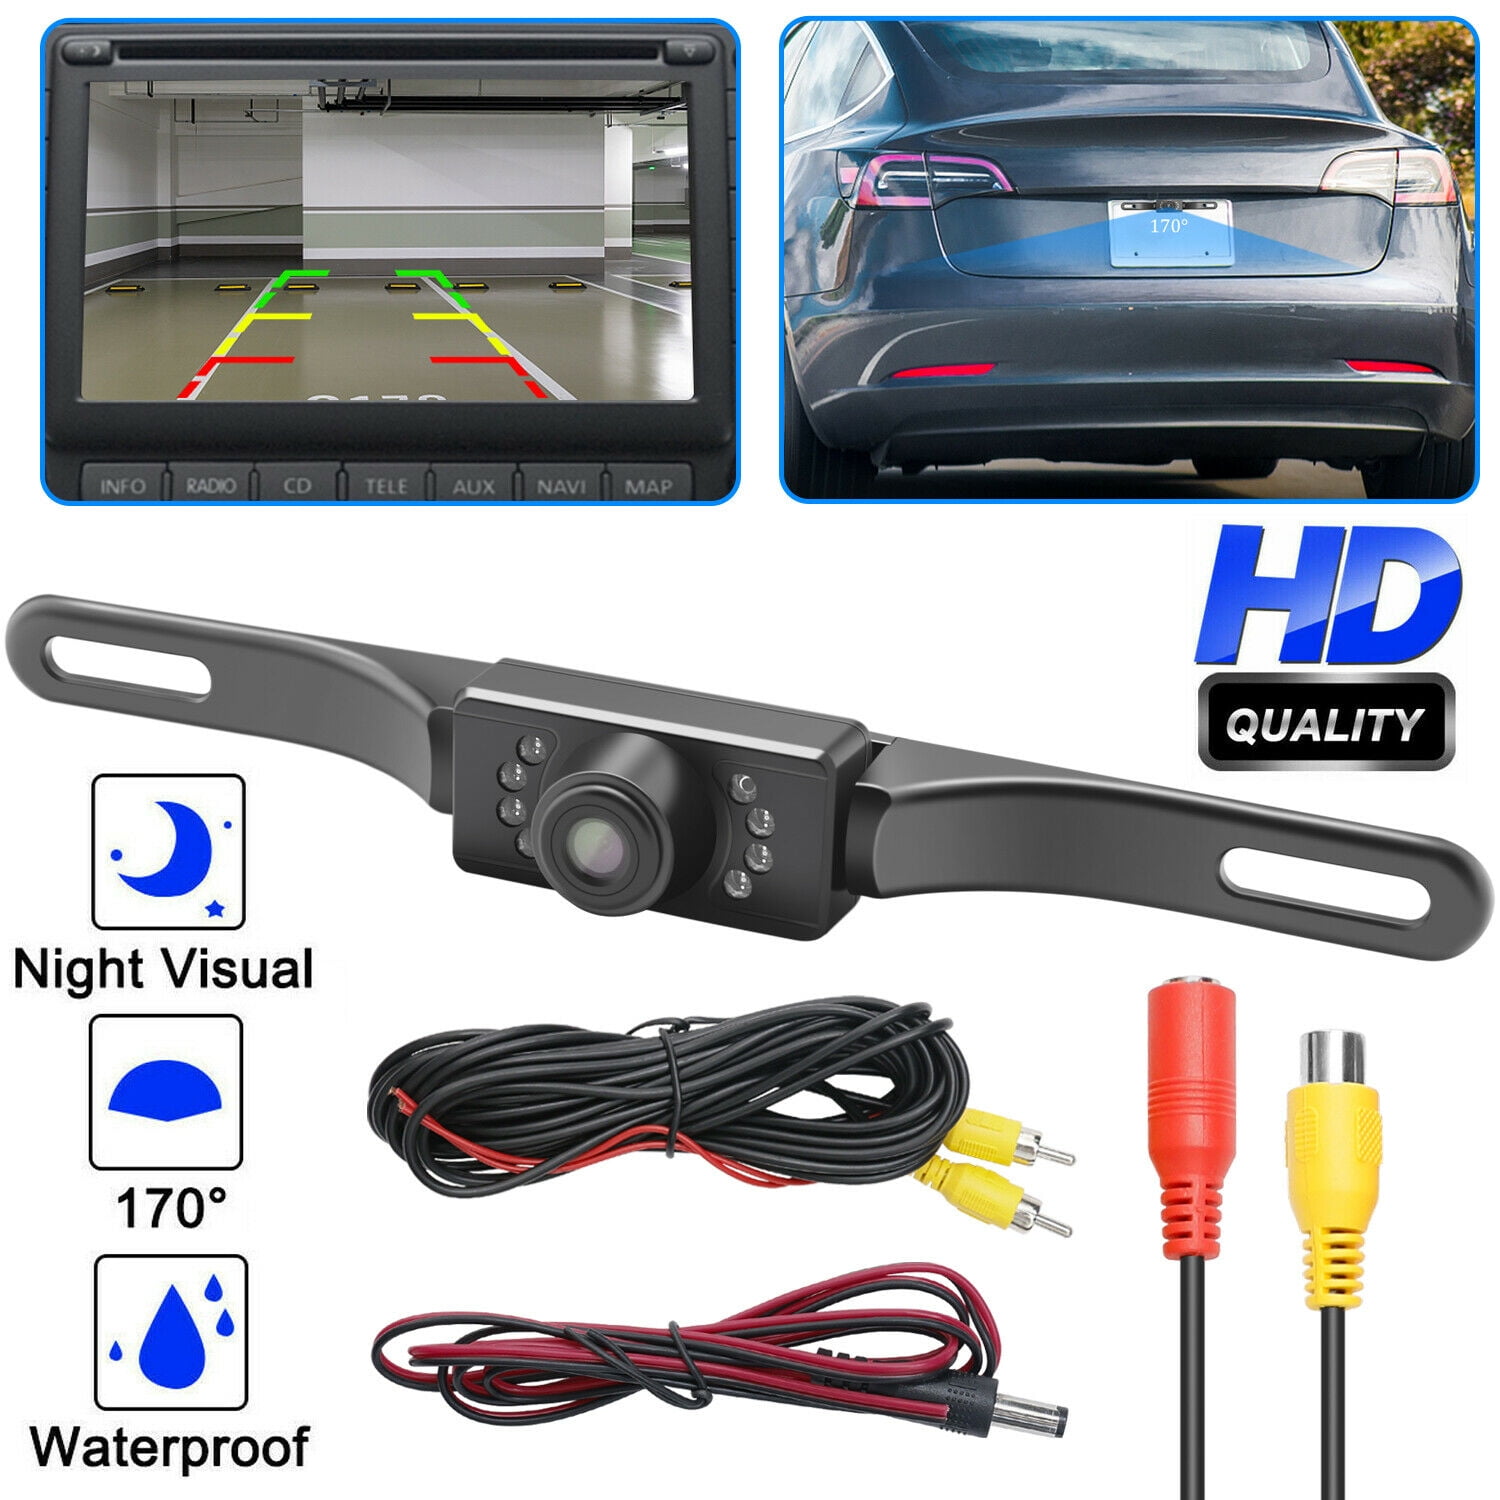 Working on the APP for Car/SUV/Truck/Van Wi-Fi License Plate Backup Camera with Frame for iOS and Android 170°Wide Angle Rear View Camera with 8 LED Lights Night Vision IP69K Waterproof Parking Line